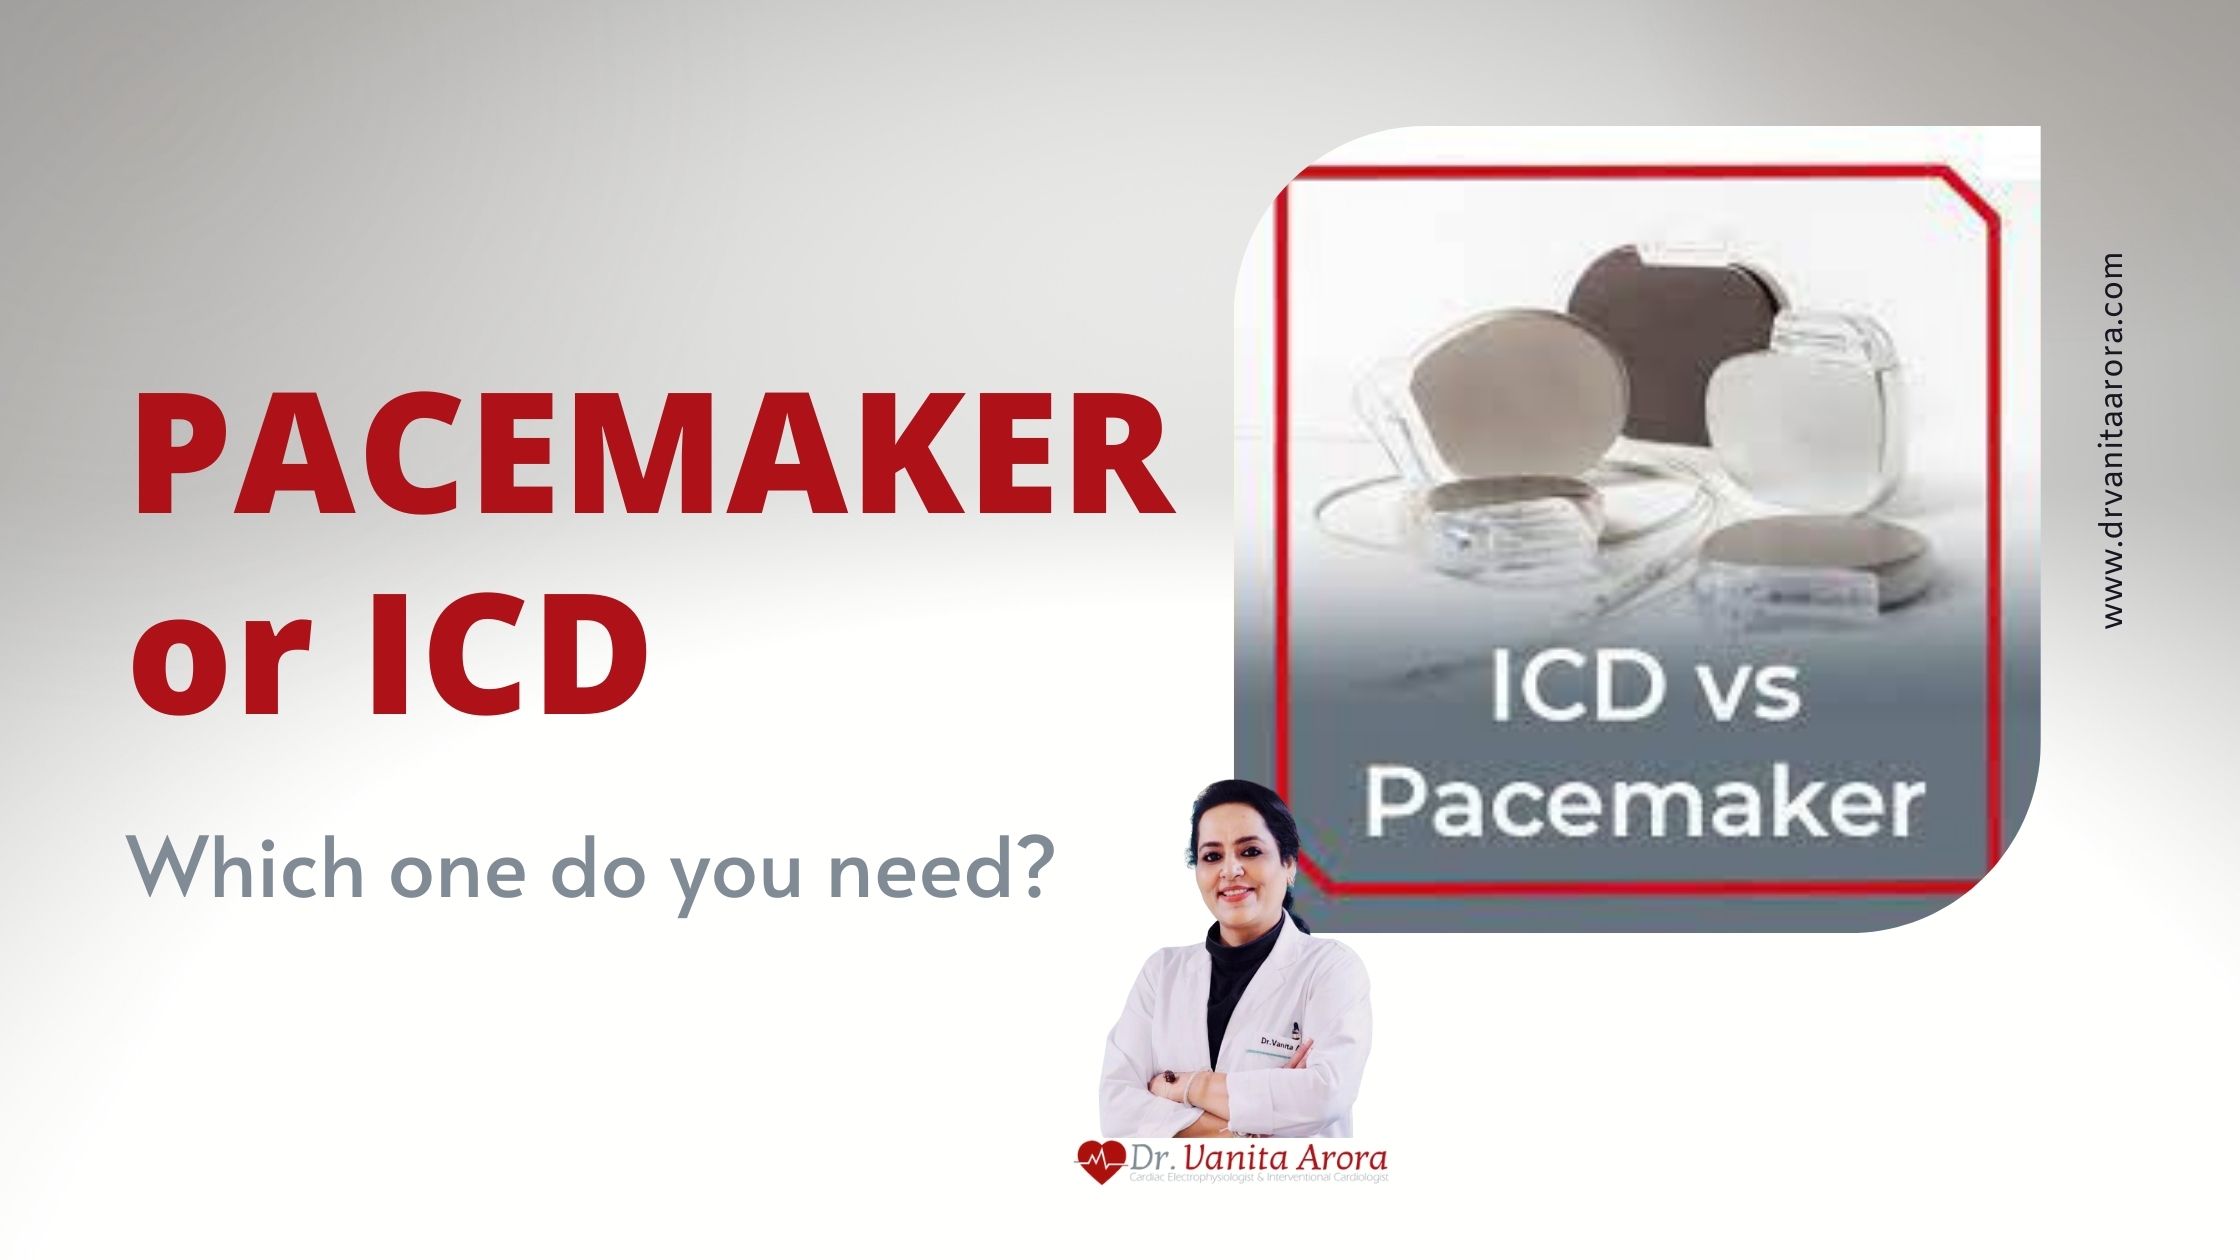 Pacemaker or ICD: Which One Do I Need?